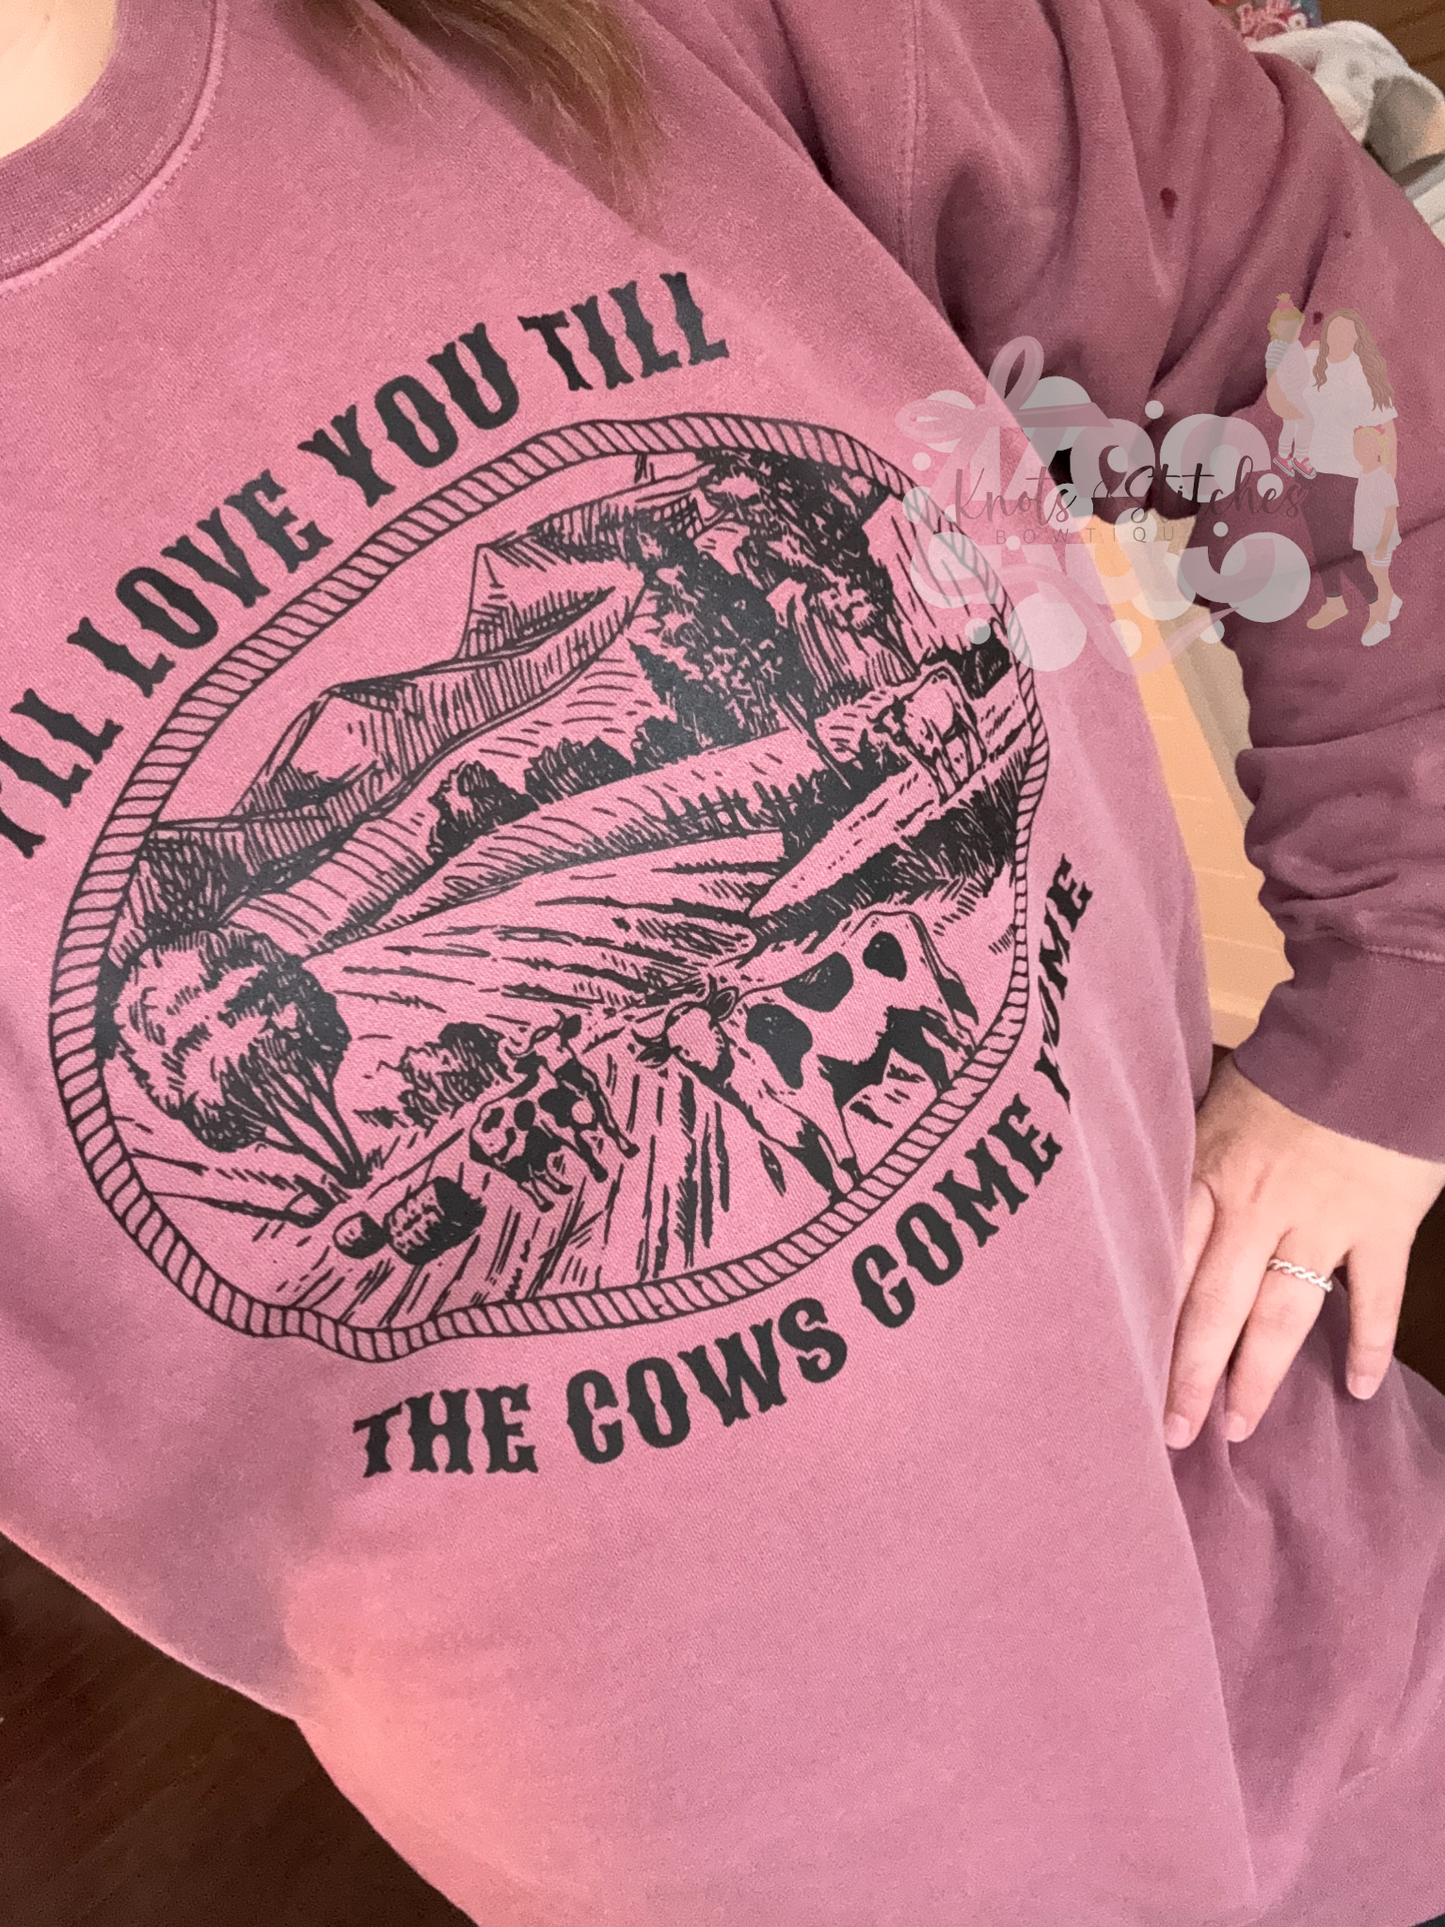 I’ll love you till the cows come home crew